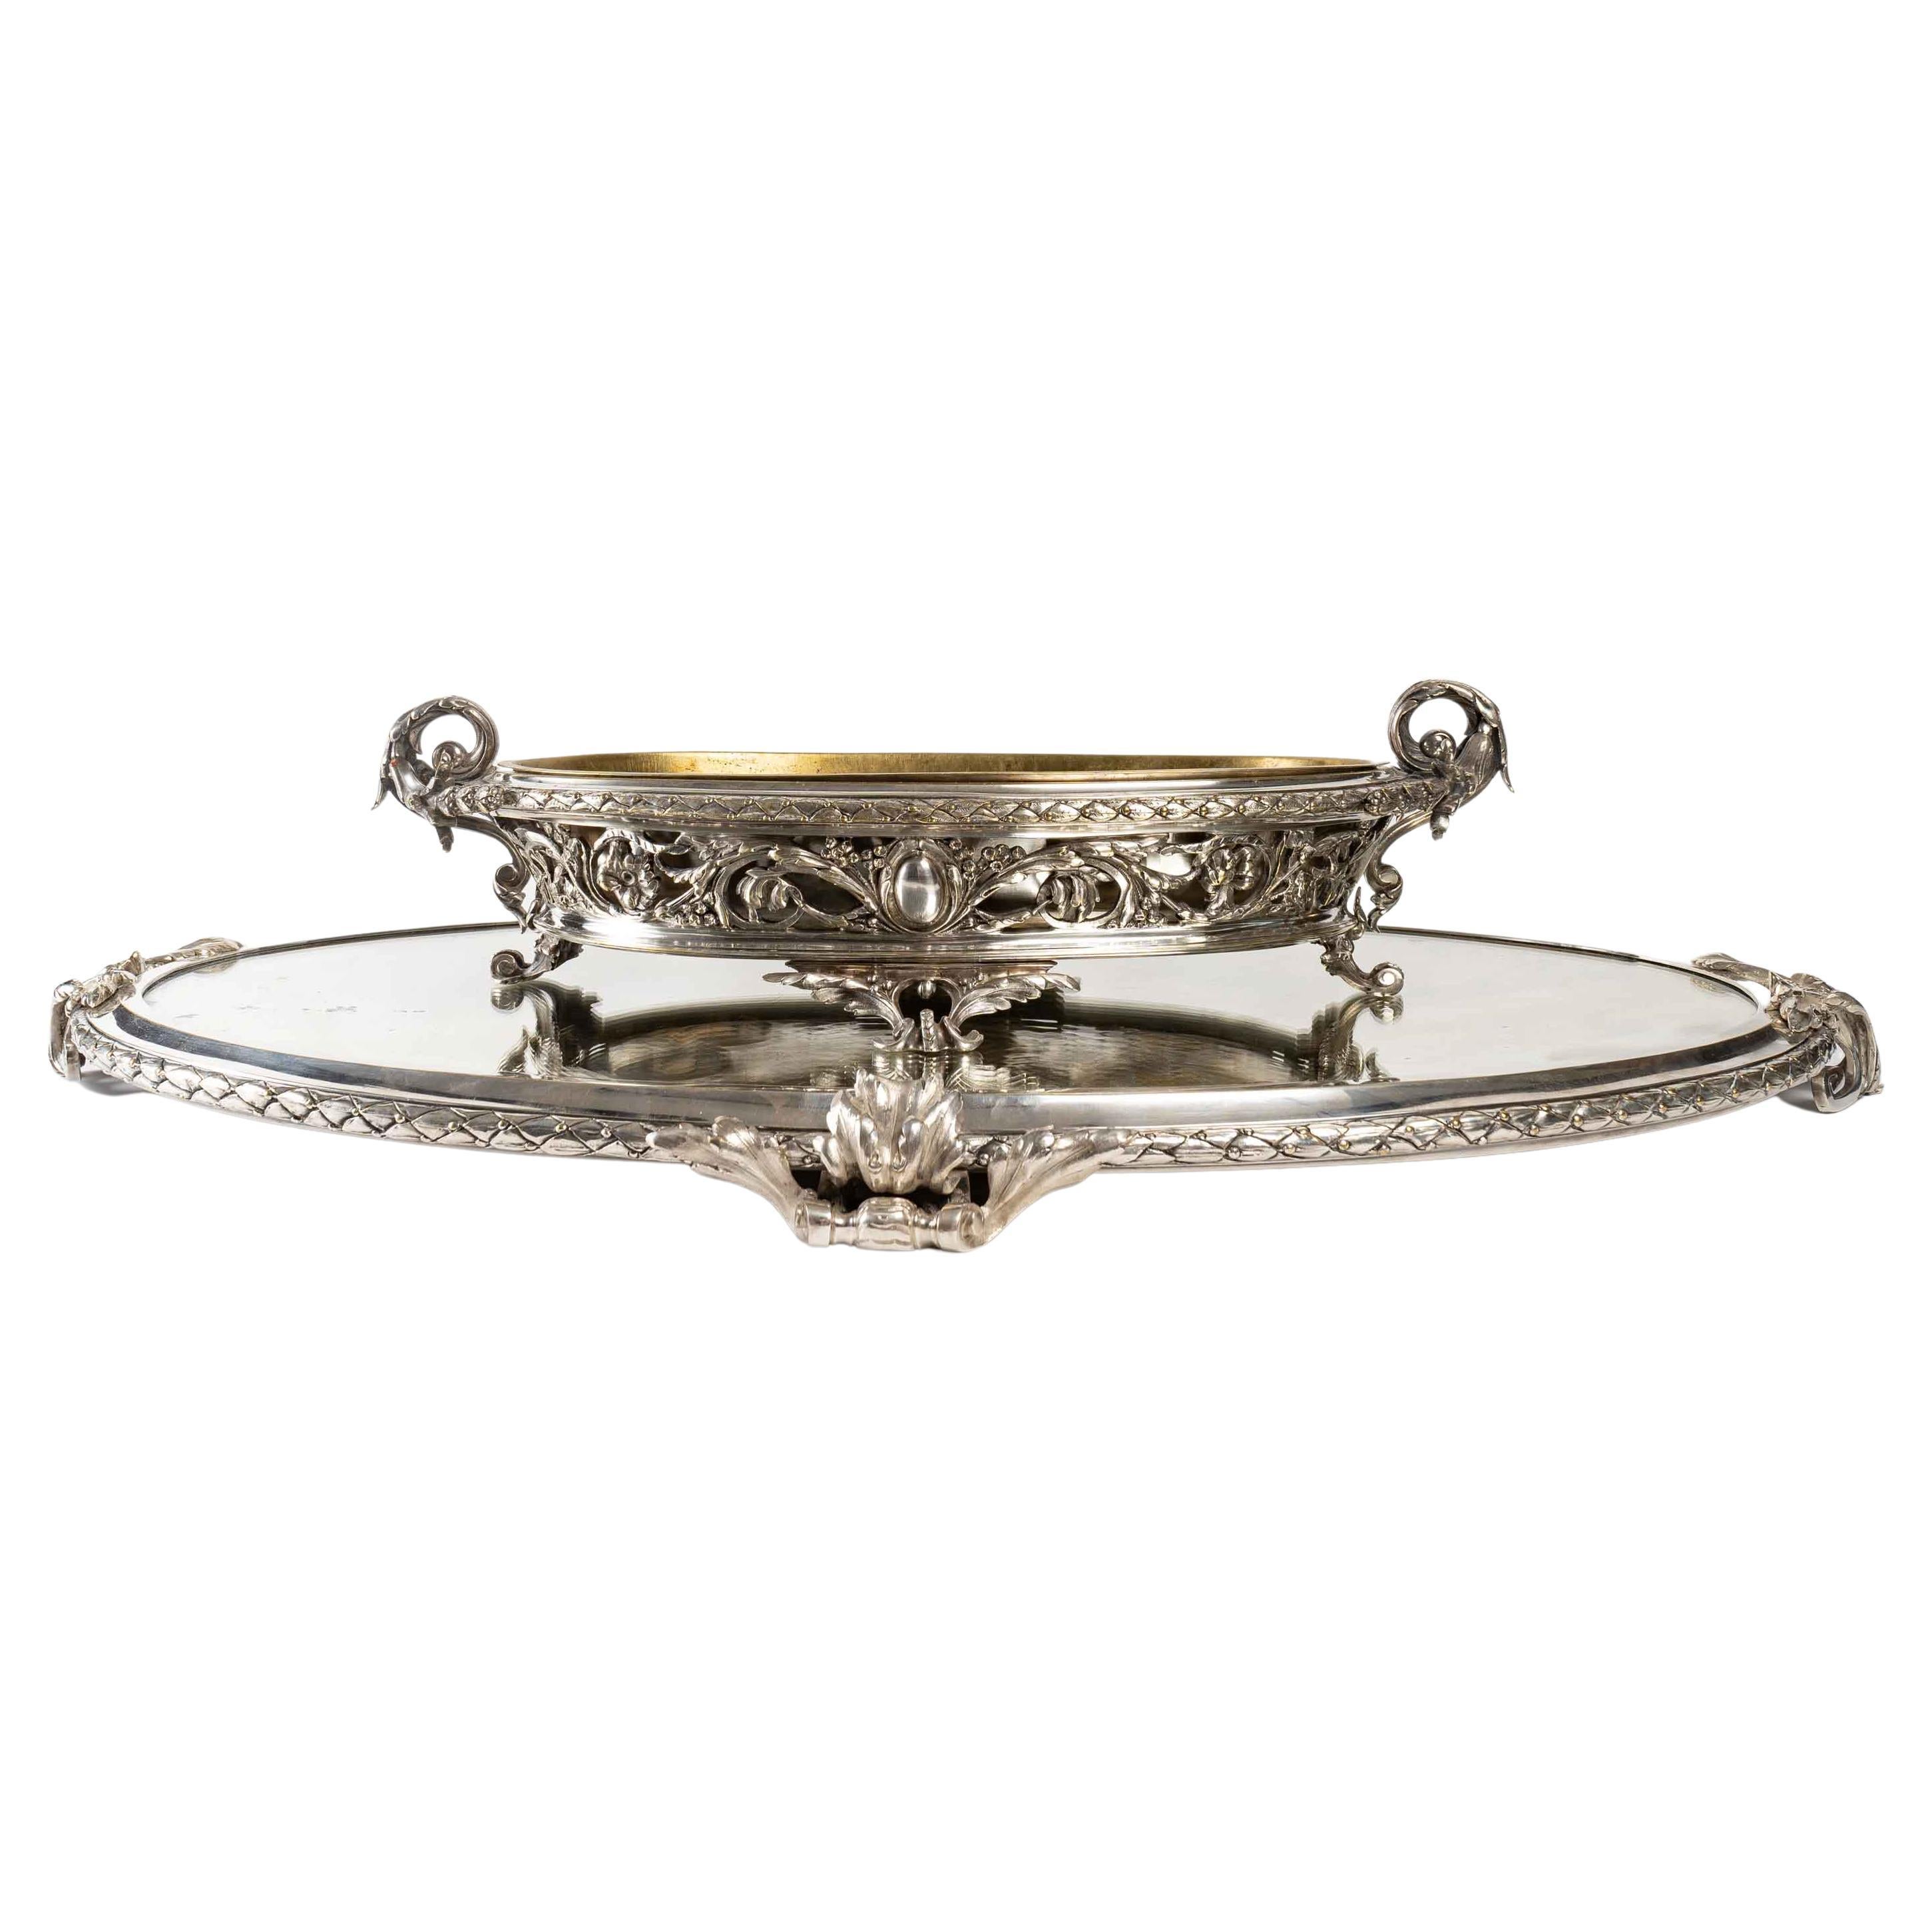 Important silvered bronze jardinière and table centrepiece, 19th century